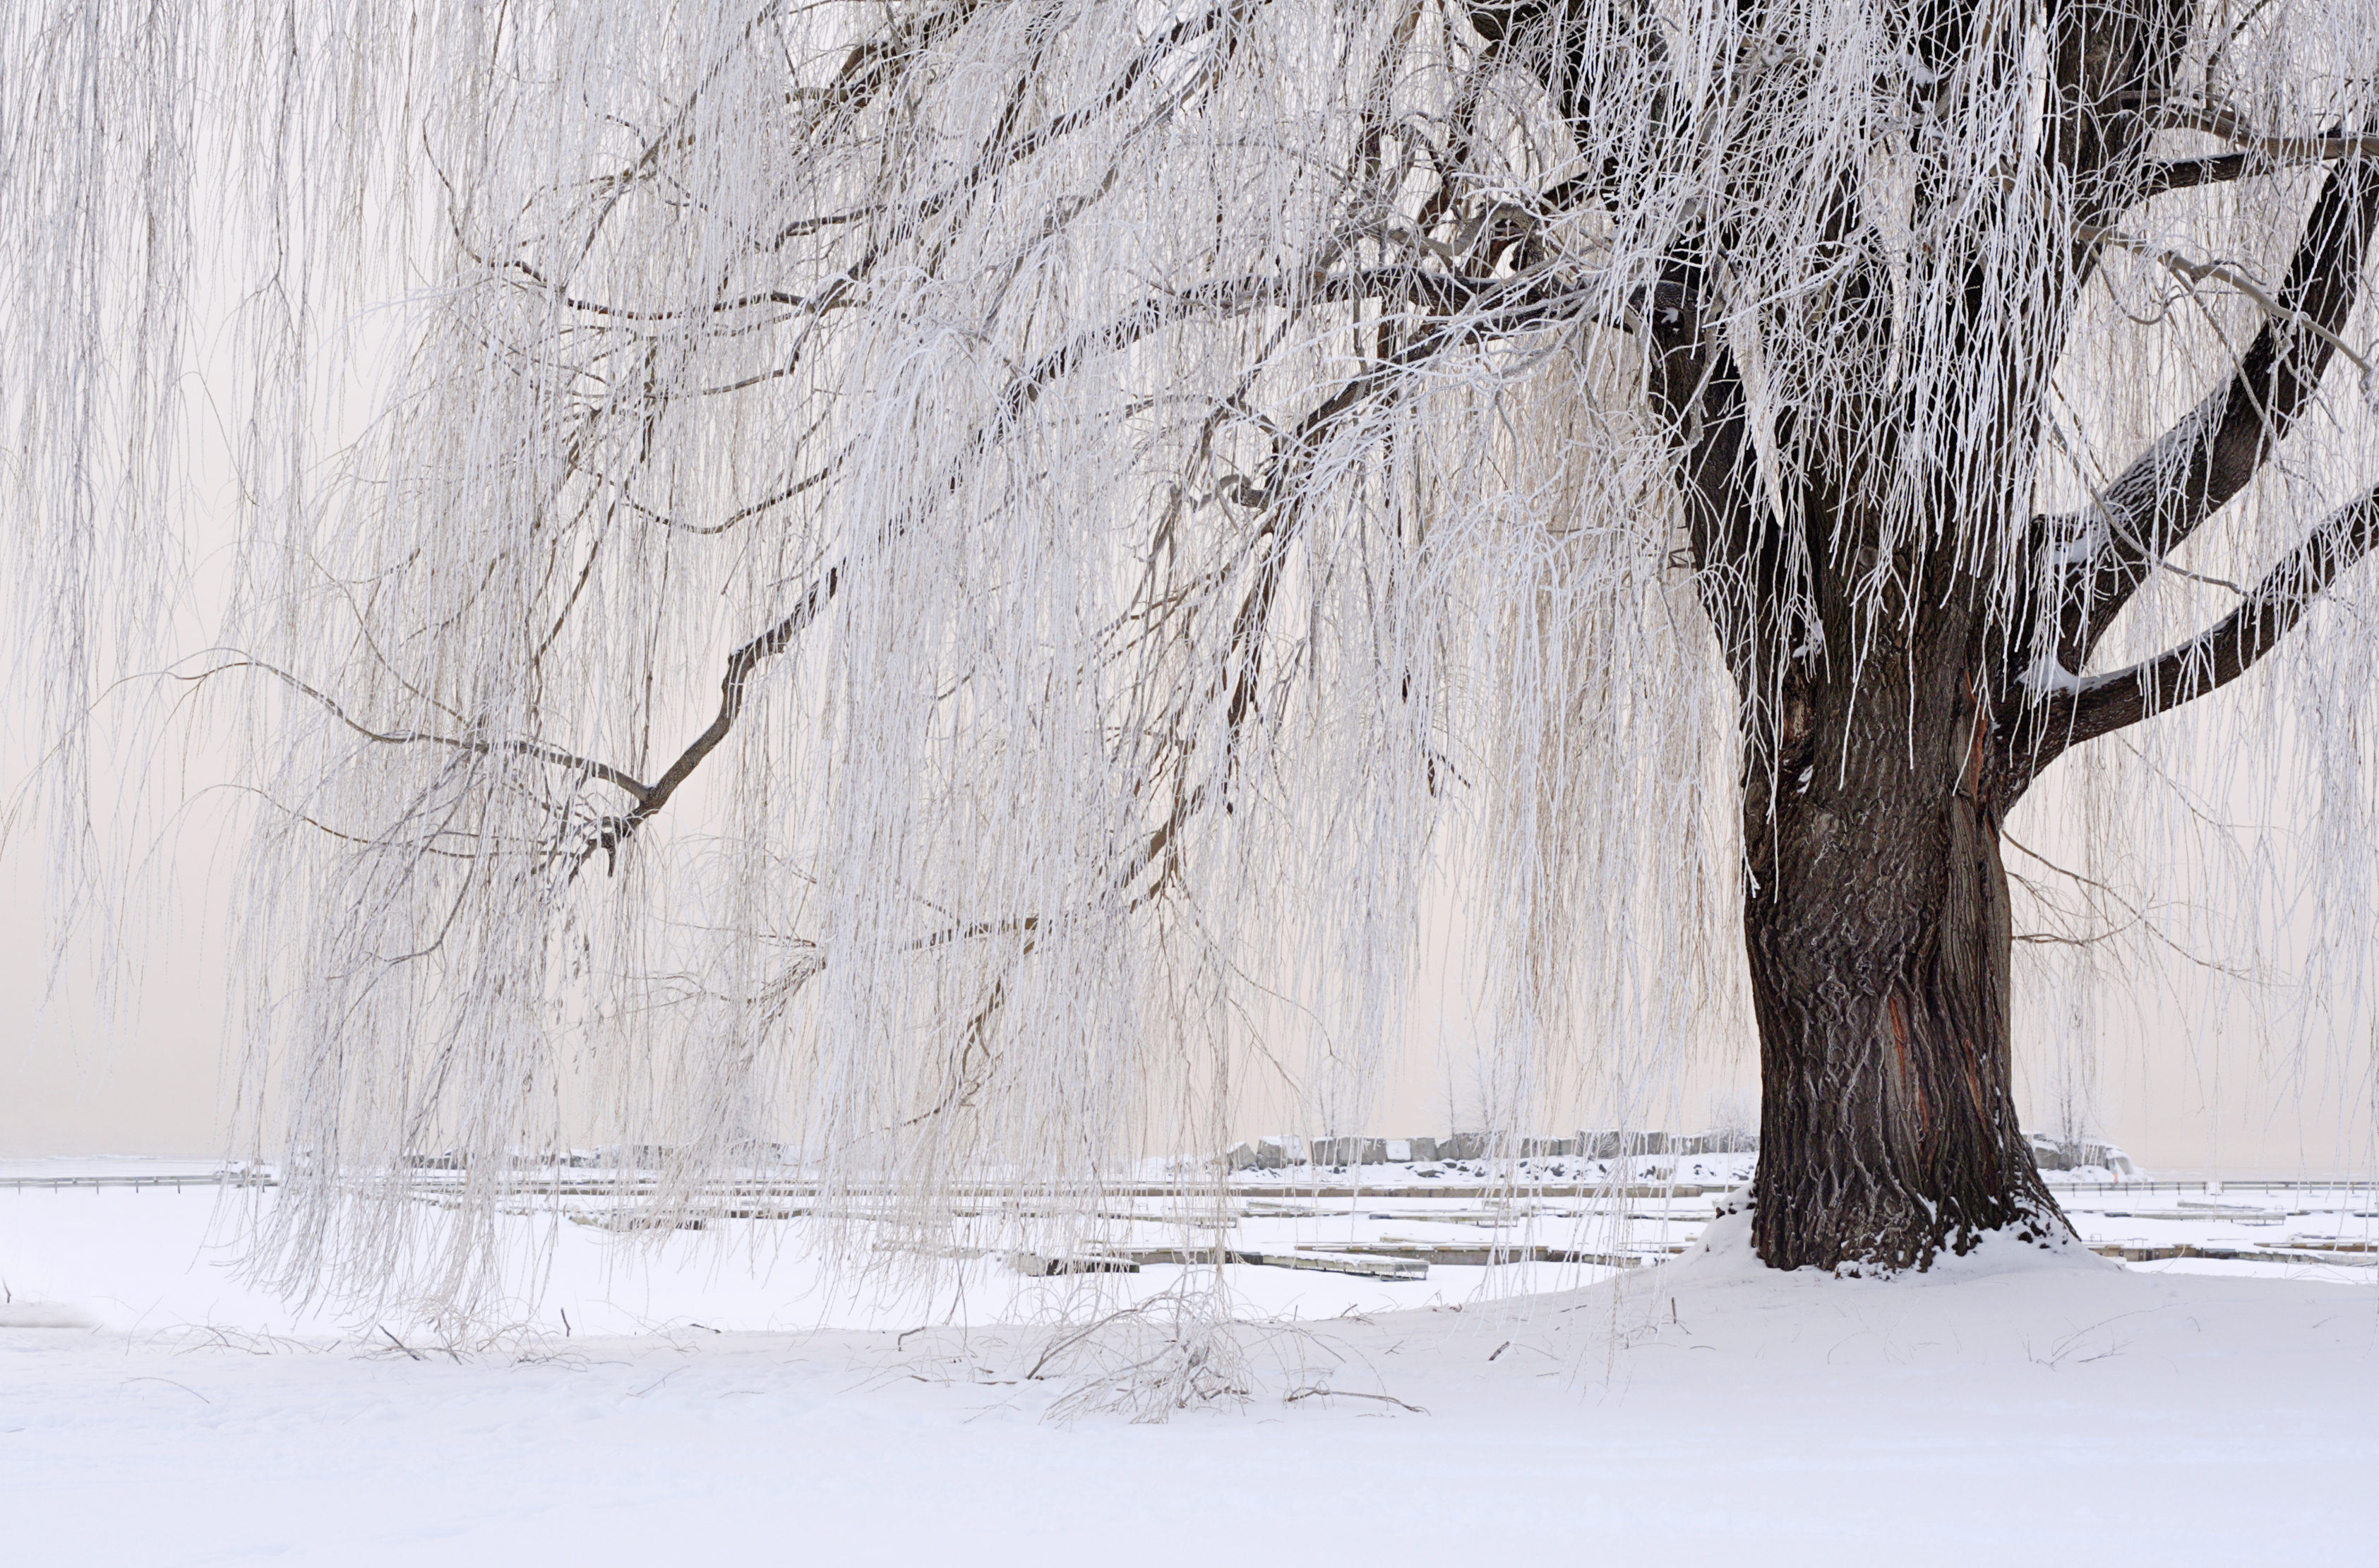 Weeping willow covered in snow in a snow-covered field